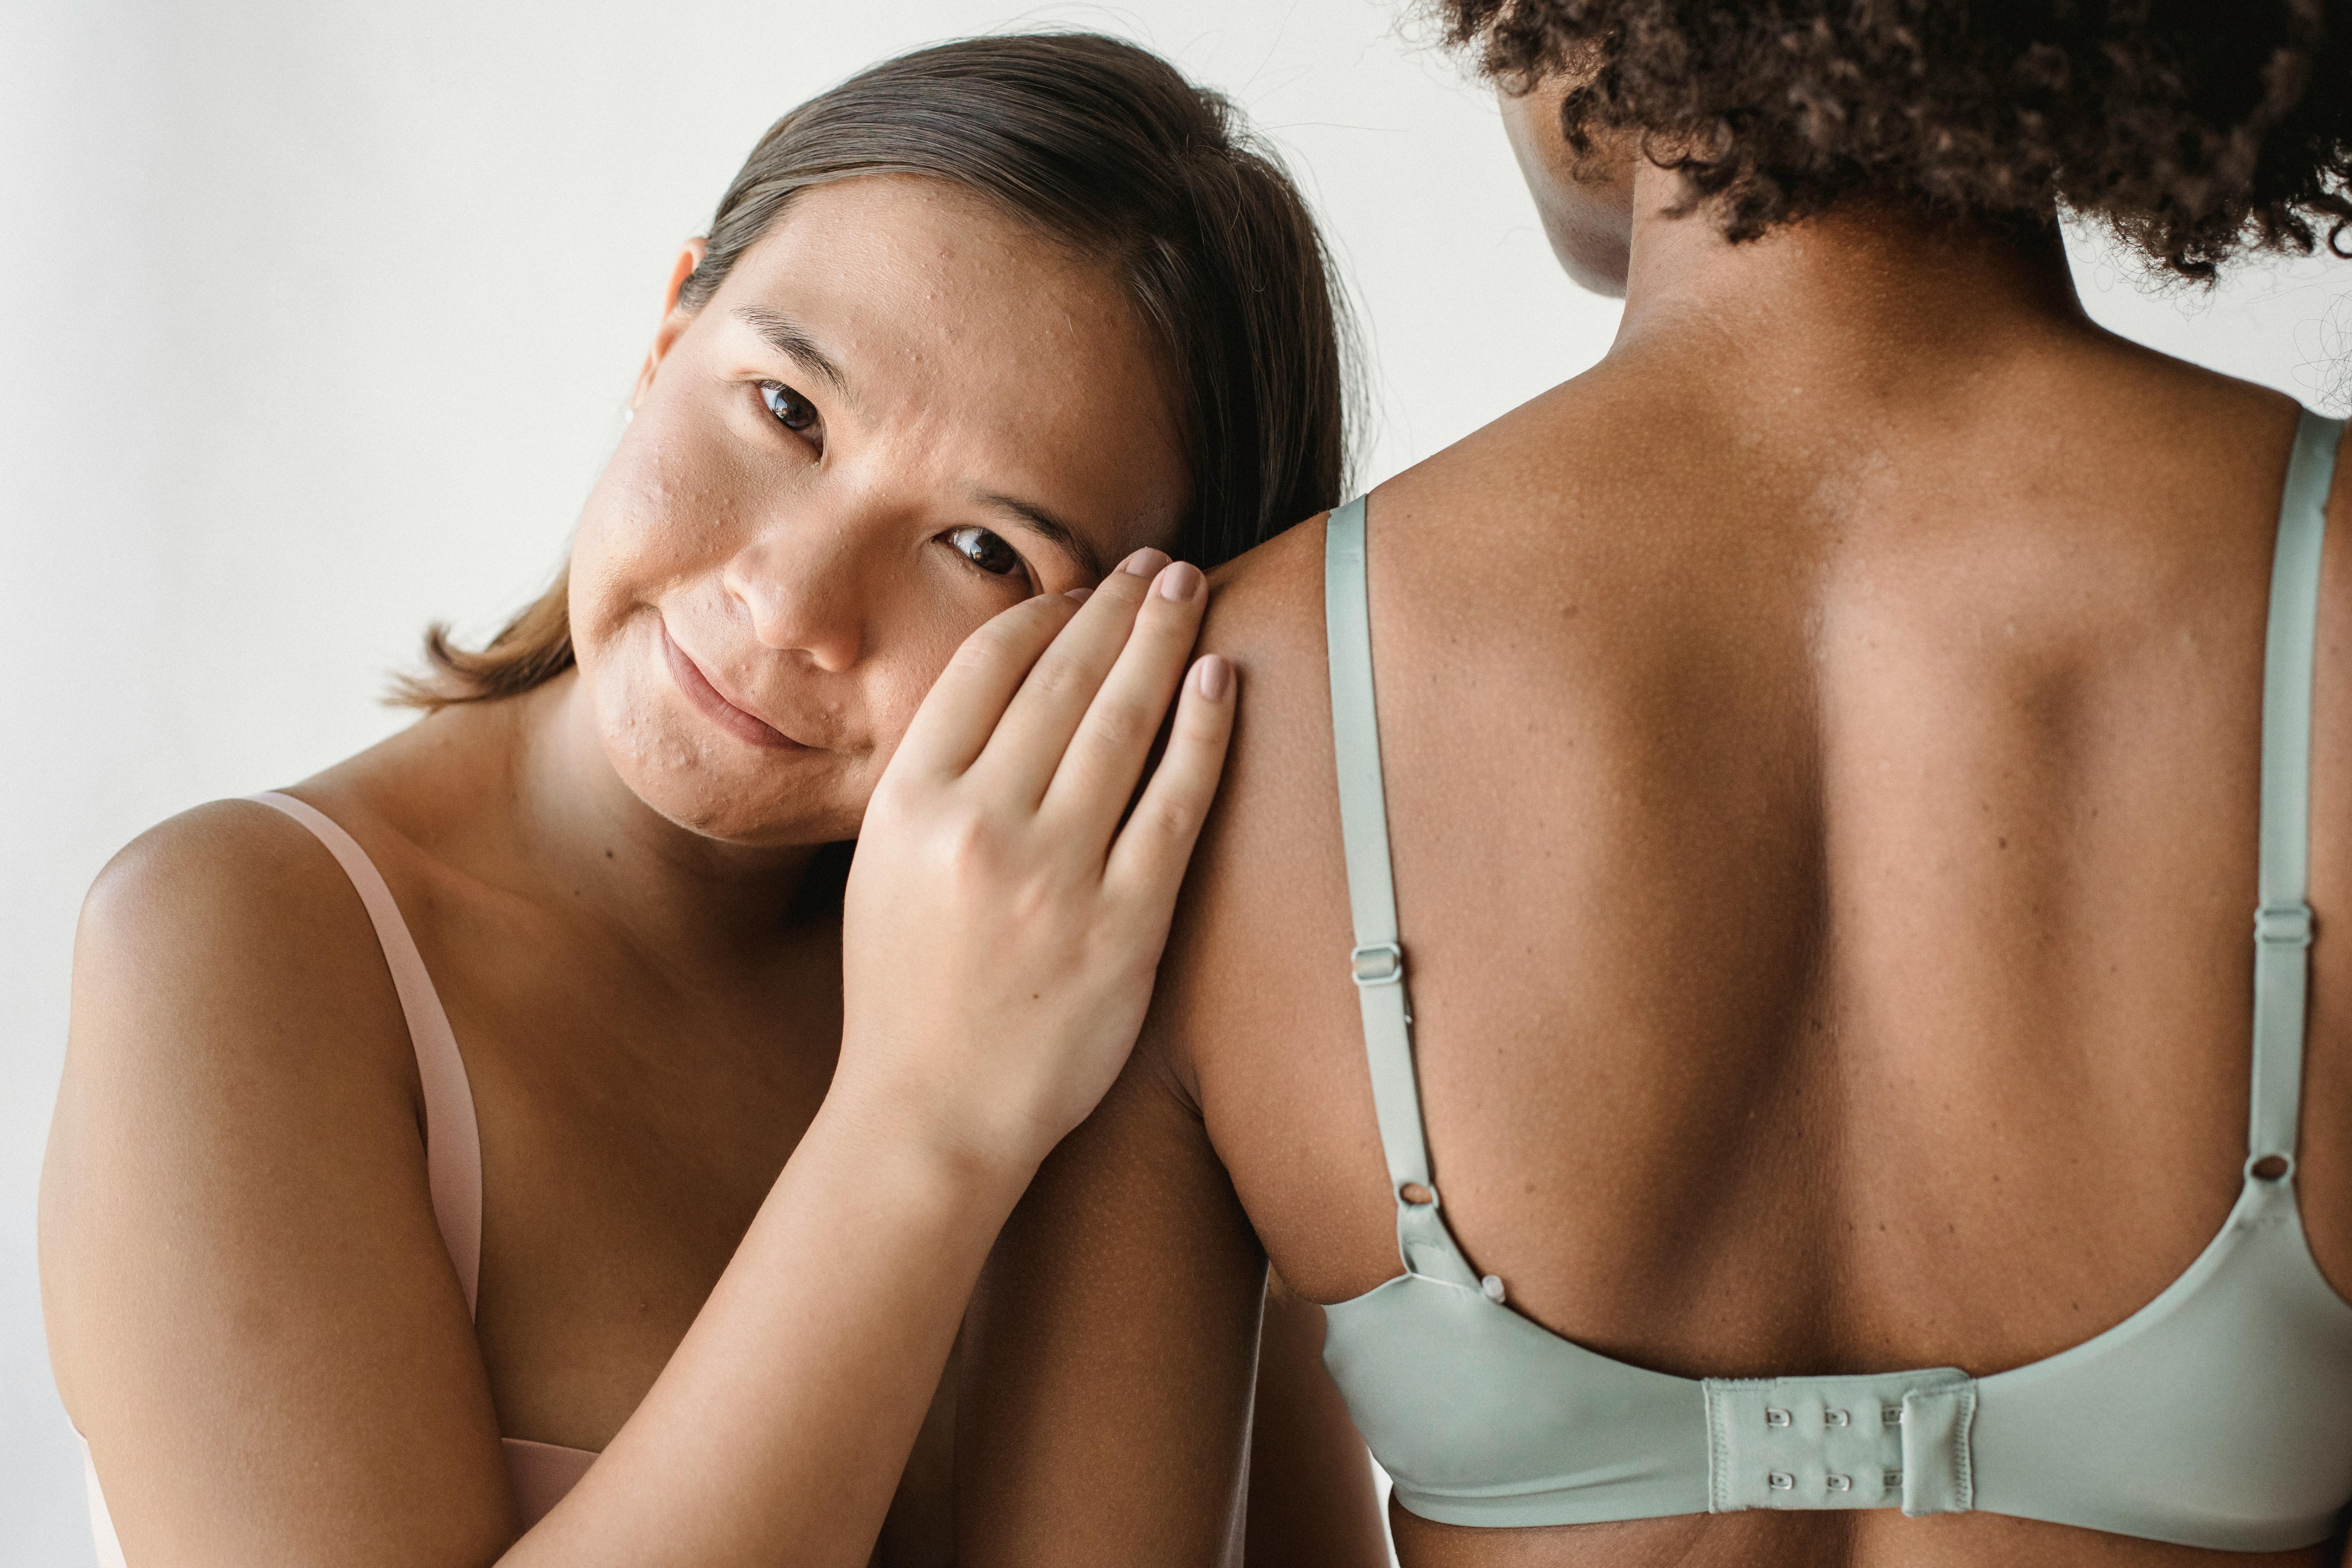 Bye-bye Back Pain: How Front Closure Bras Can Provide Much-Needed Relief and Support.